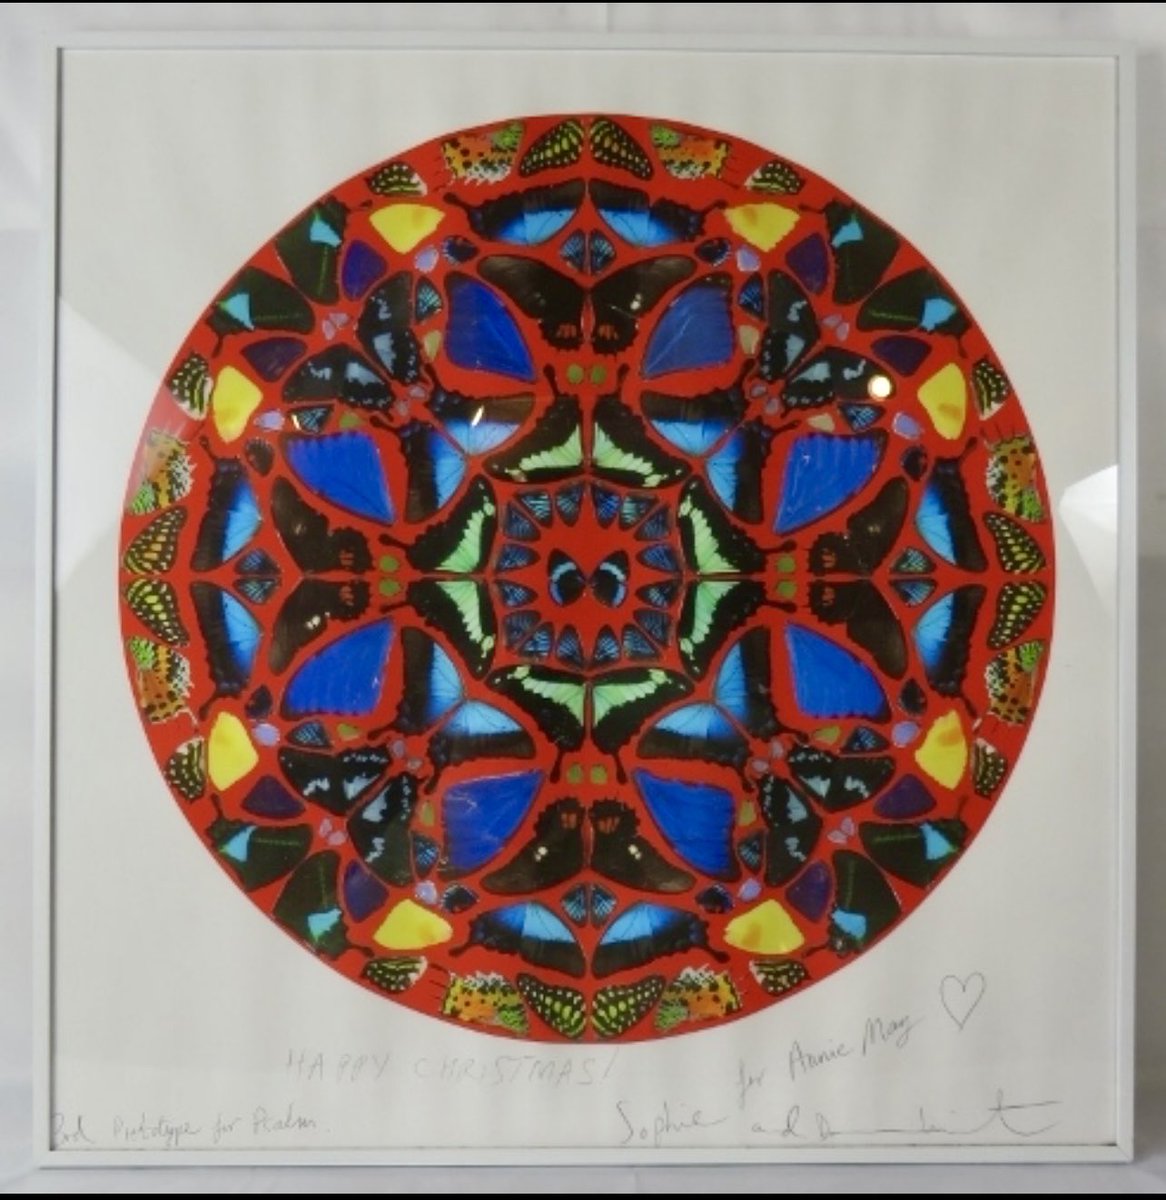 Bentleys 3rd May Auction is open for viewing Wednesday afternoon and Thursday all day …DAMIEN HIRST (1965) - A LARGE FRAMED AND GLAZED LITHOGRAPH, BUTTERFLIES WITHIN A RED CIRCLE. bentleysfineartauctioneers.co.uk #auction #art #damienhirst